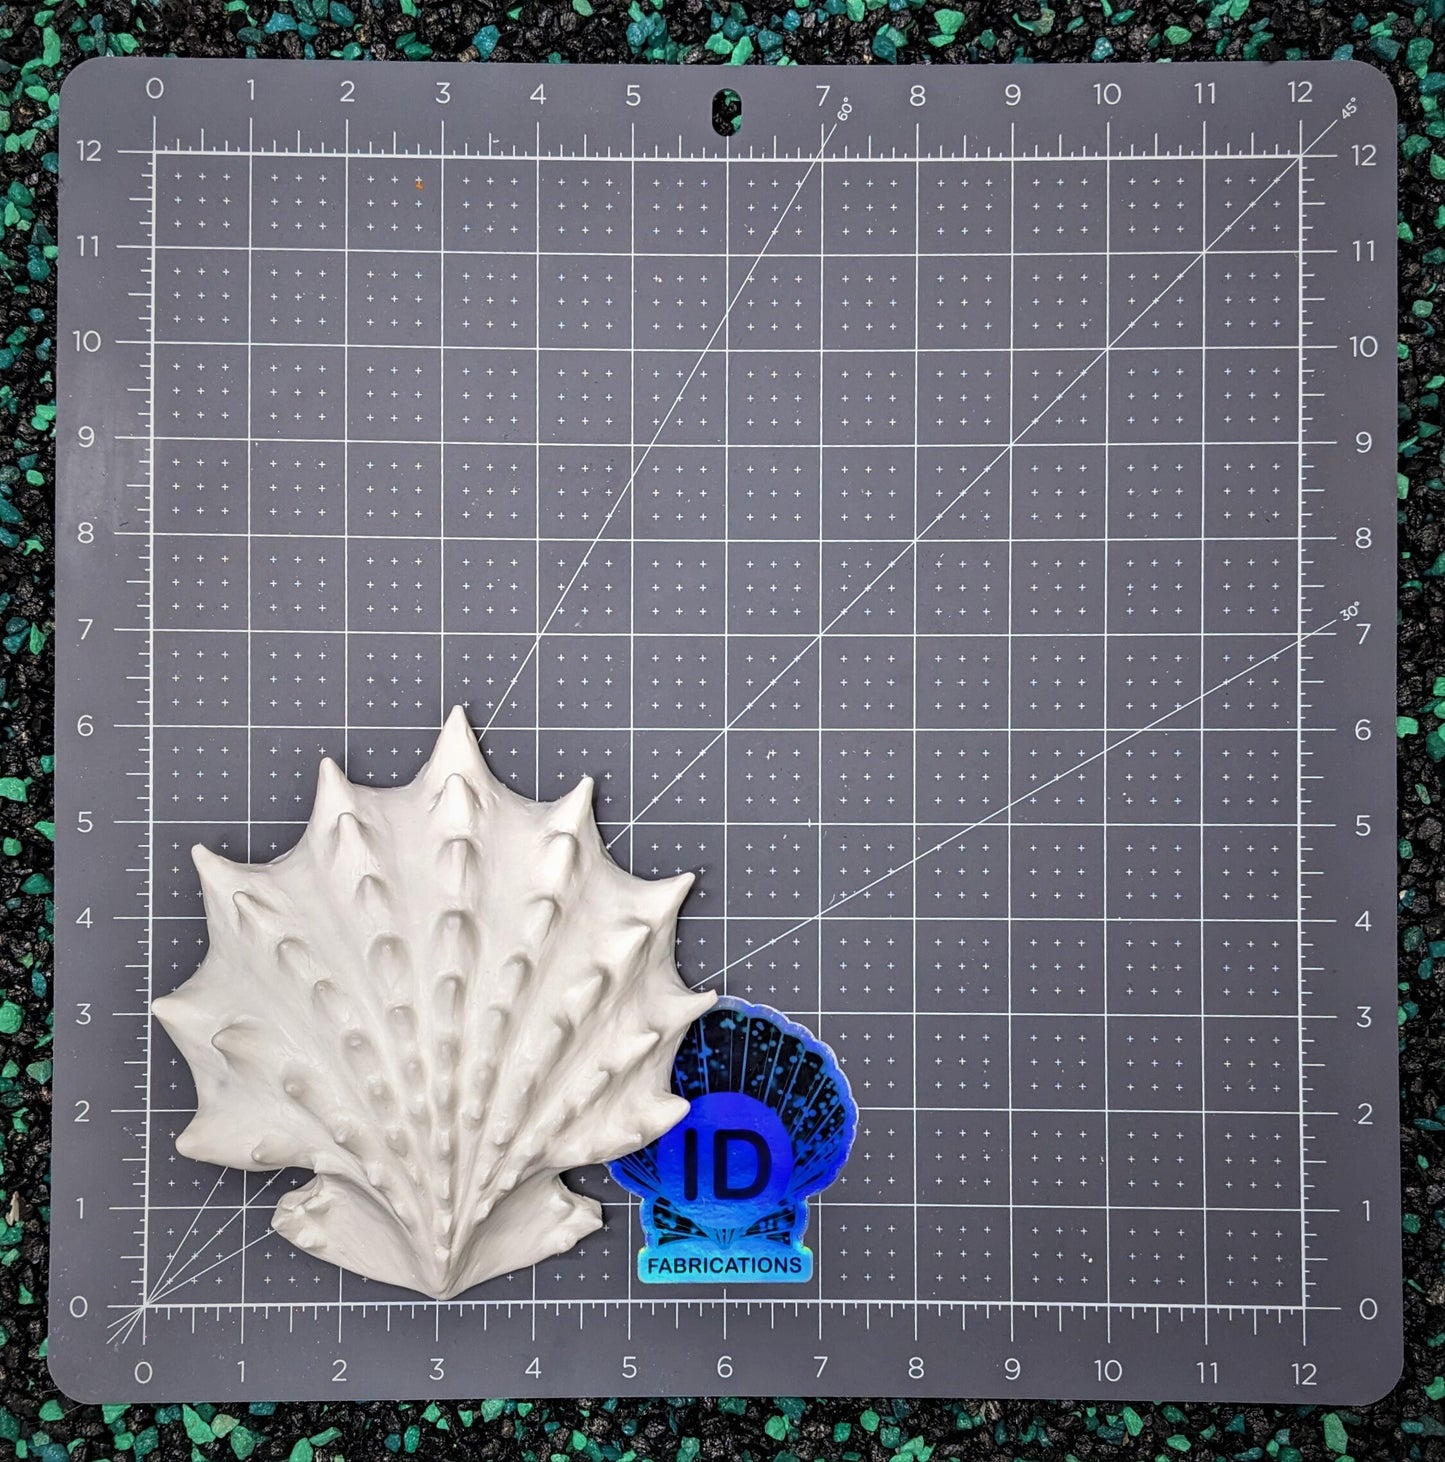 Blank plastic shell set from IDfabrications ID Fabrications for cosplay crafting mermaid tops and merfolk accessories spiny jewelbox shell set horns spikes